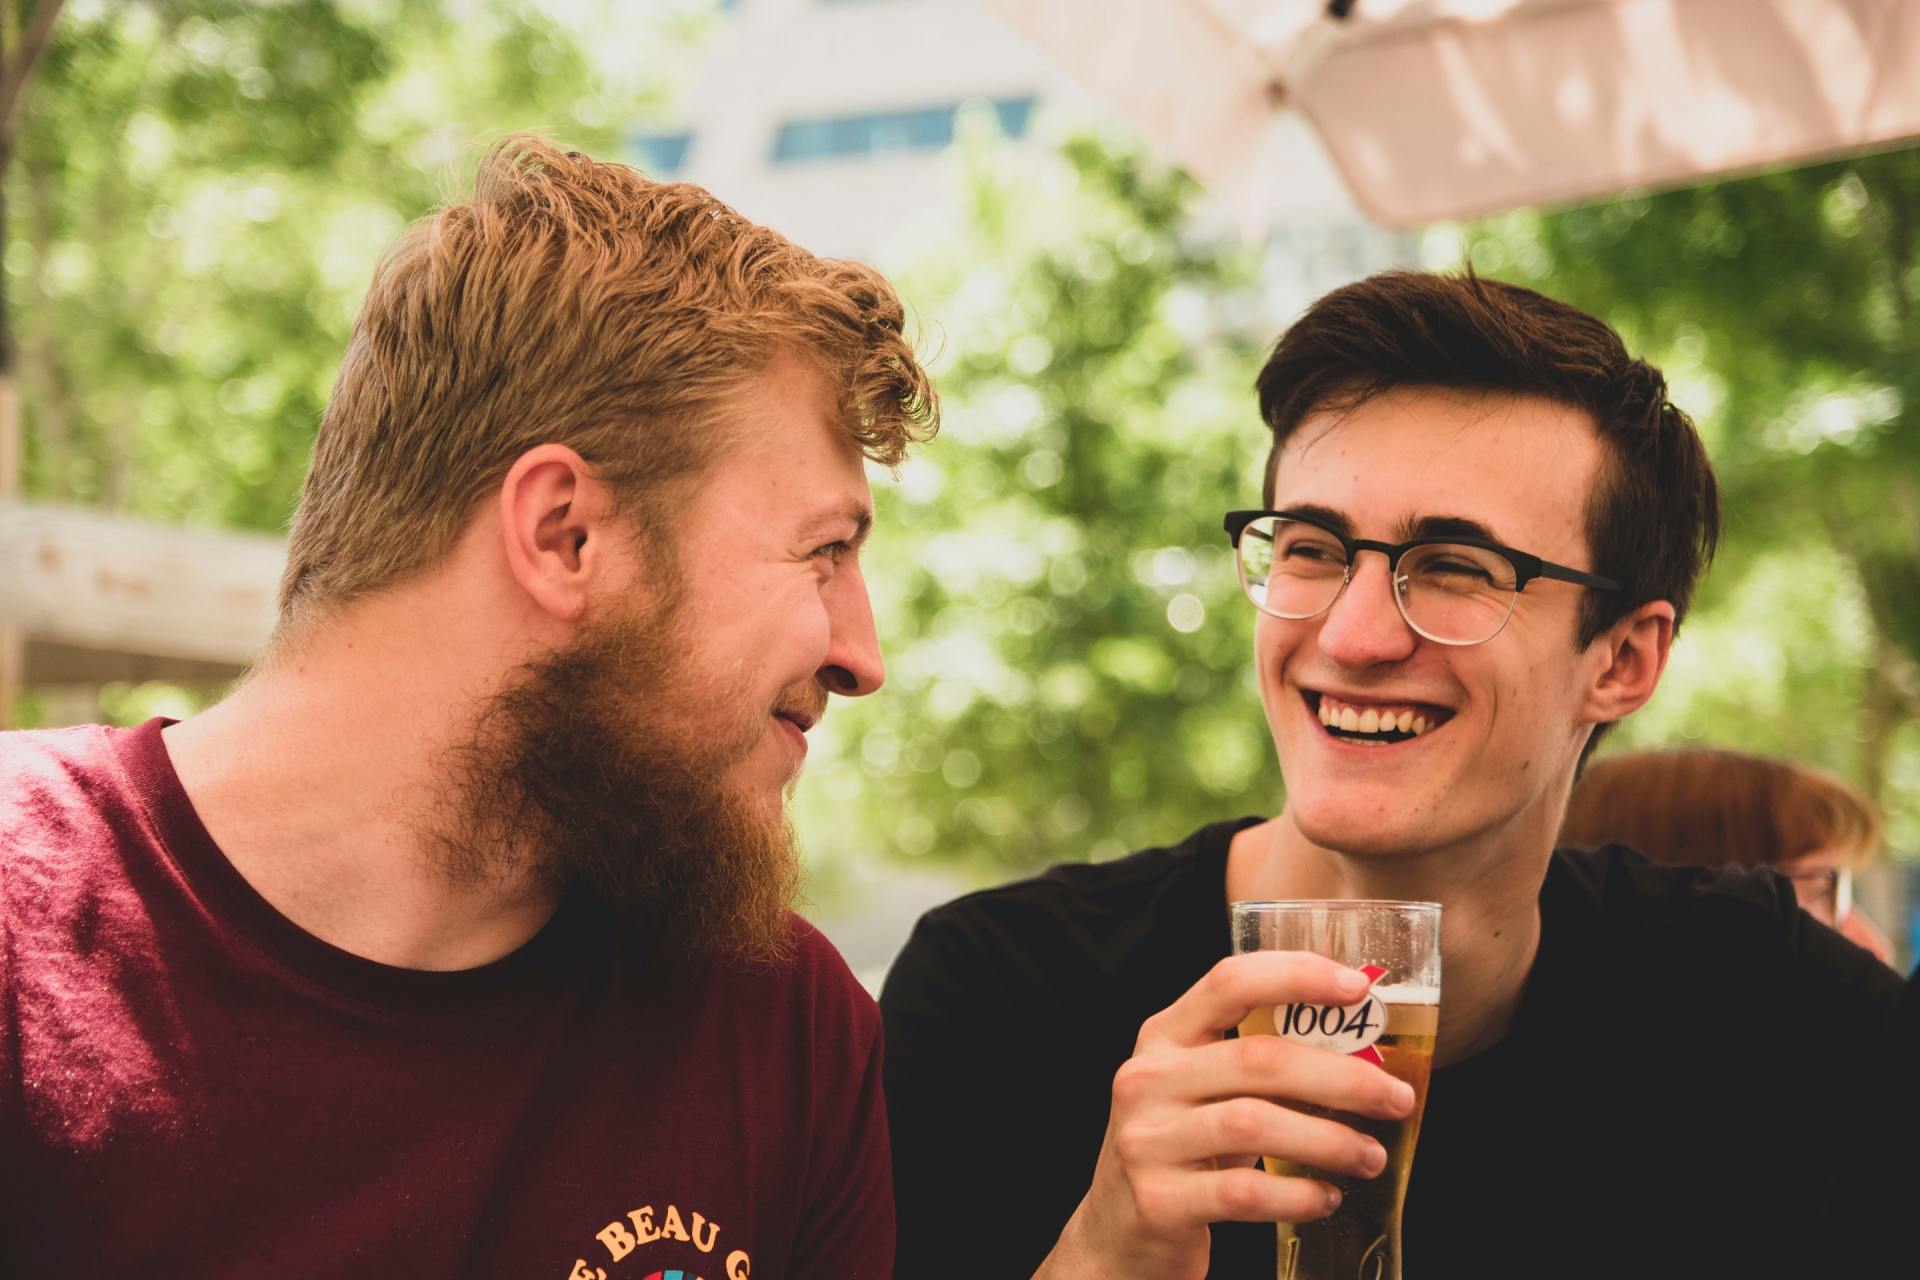 Two men sitting next to each other drinking beer and laughing.